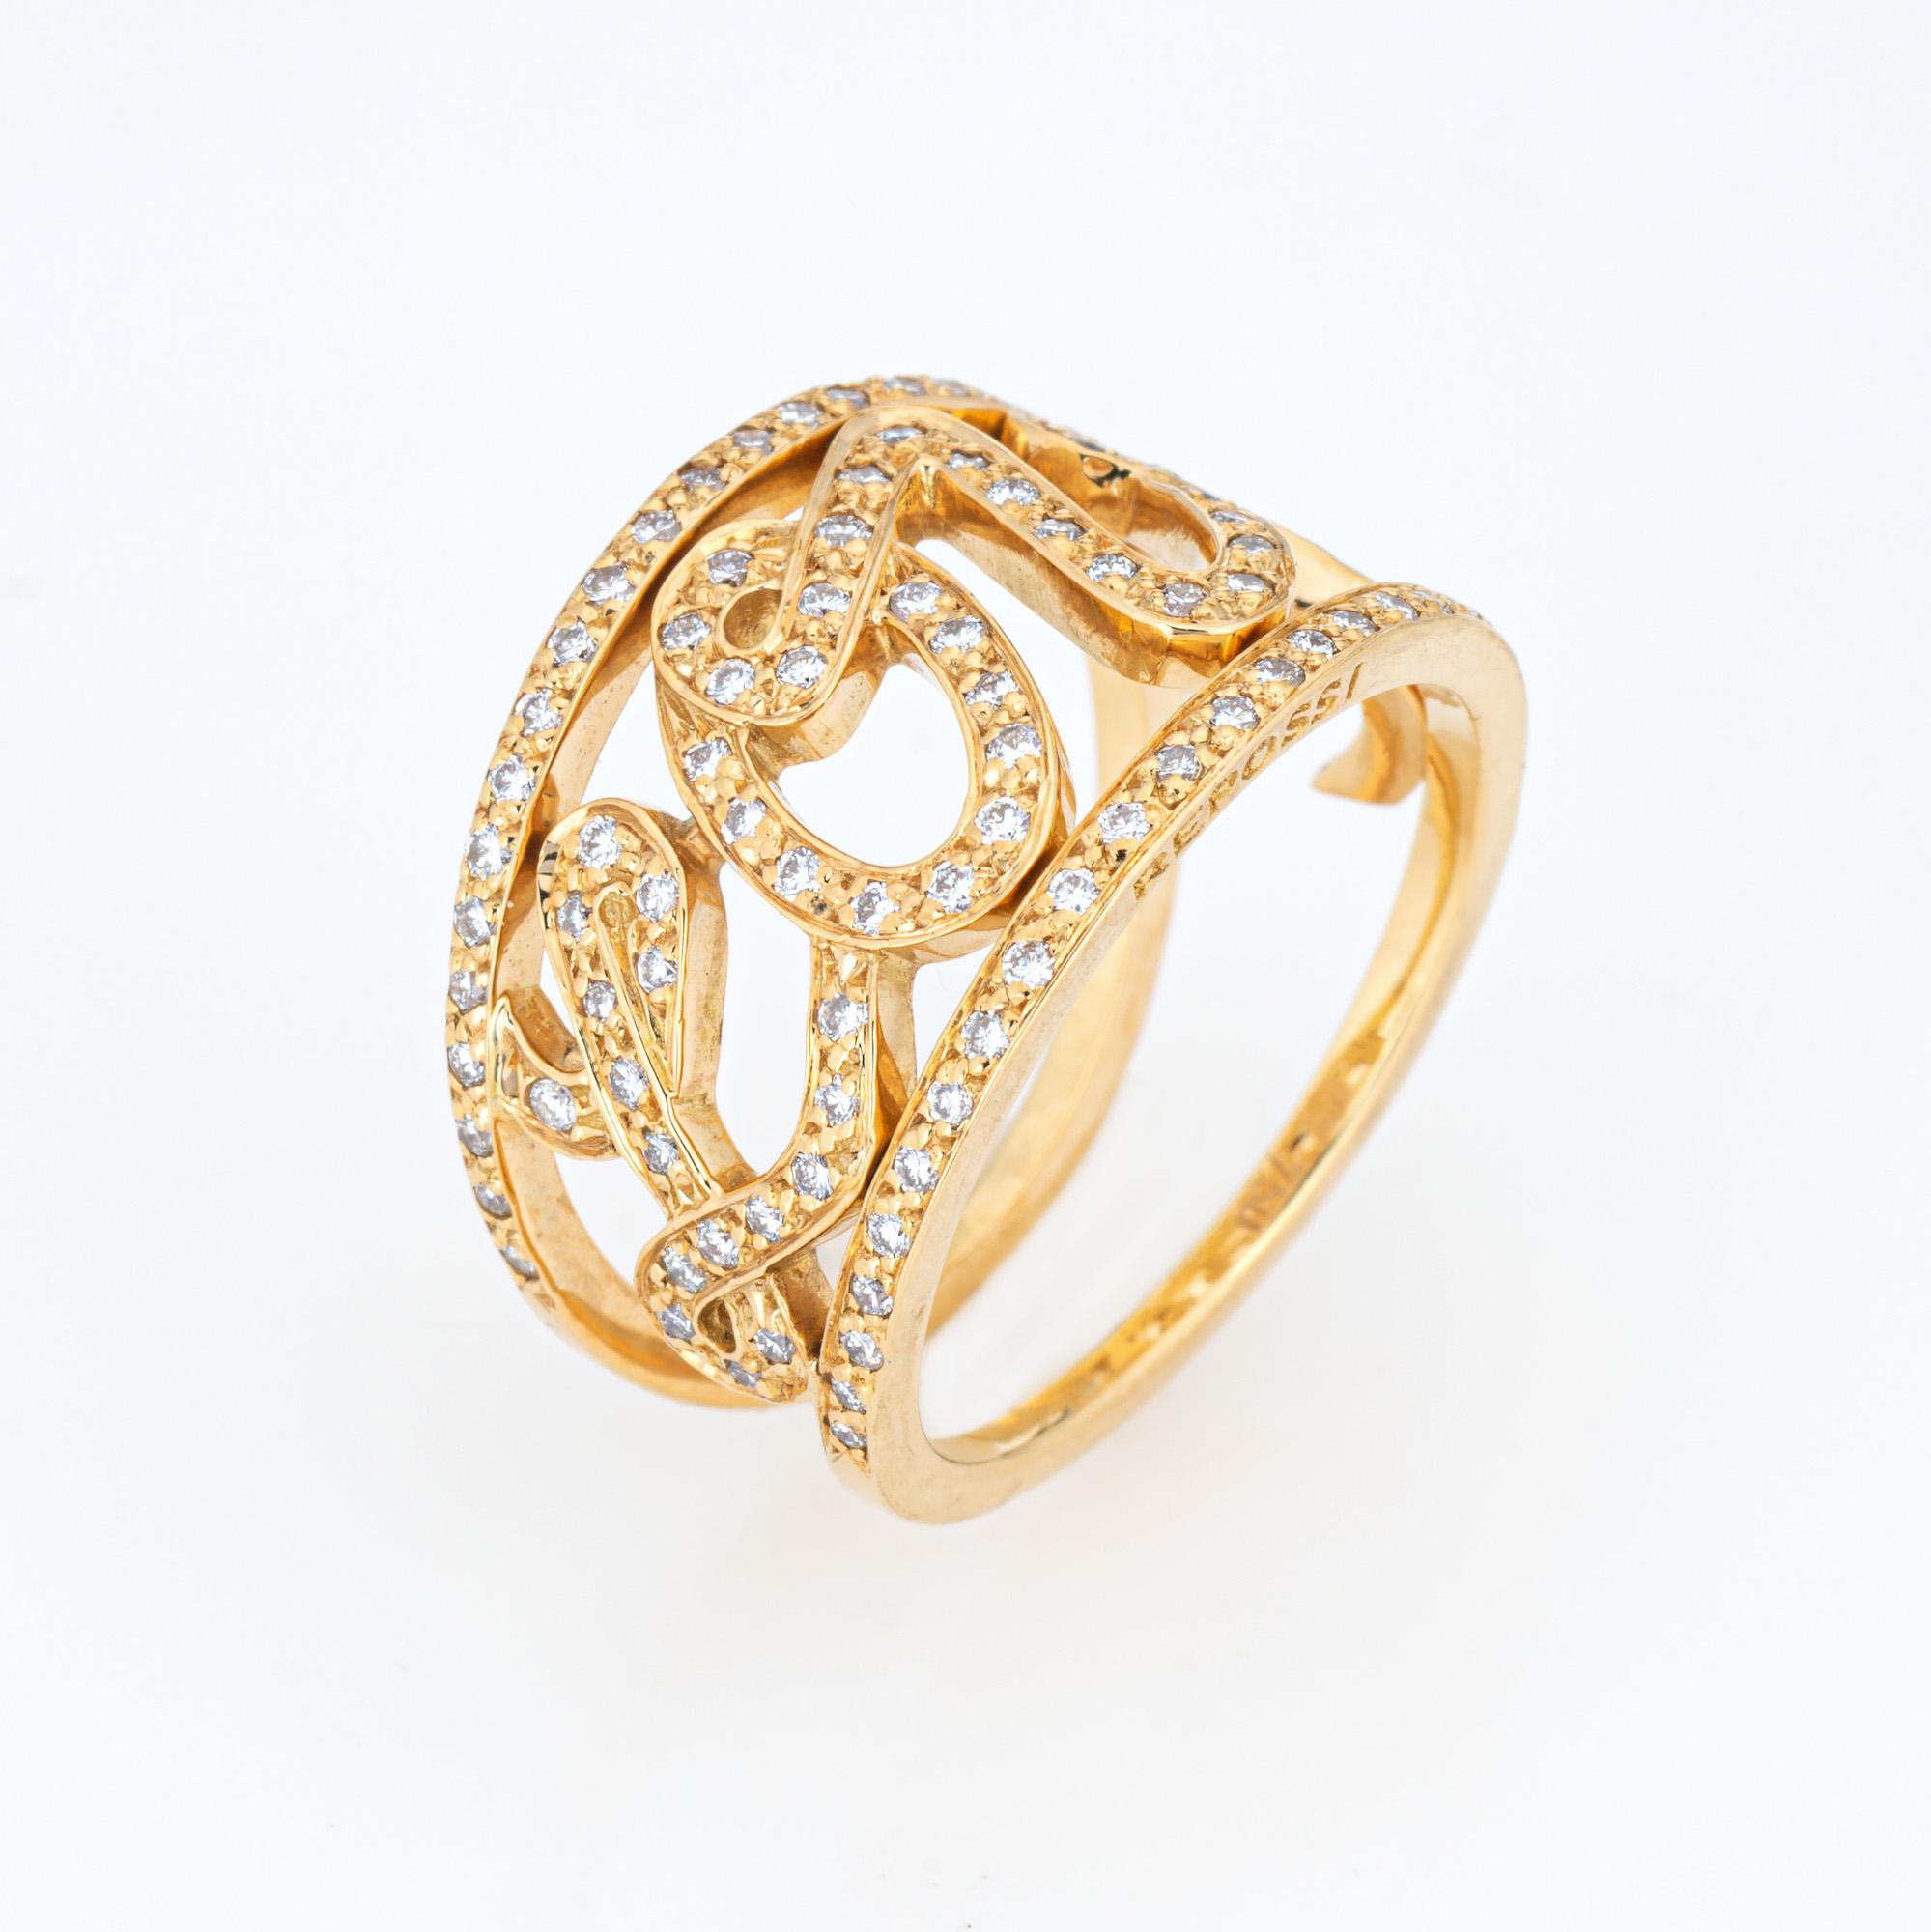 Pre-owned Repossi Diamond 'Love' cursive script ring crafted in 18 karat yellow gold.  

Round brilliant cut diamonds total an estimated 0.55 carats (estimated at G-H color and VS2-SI1 clarity). 
The simple and elegant 'Love' script split shank band